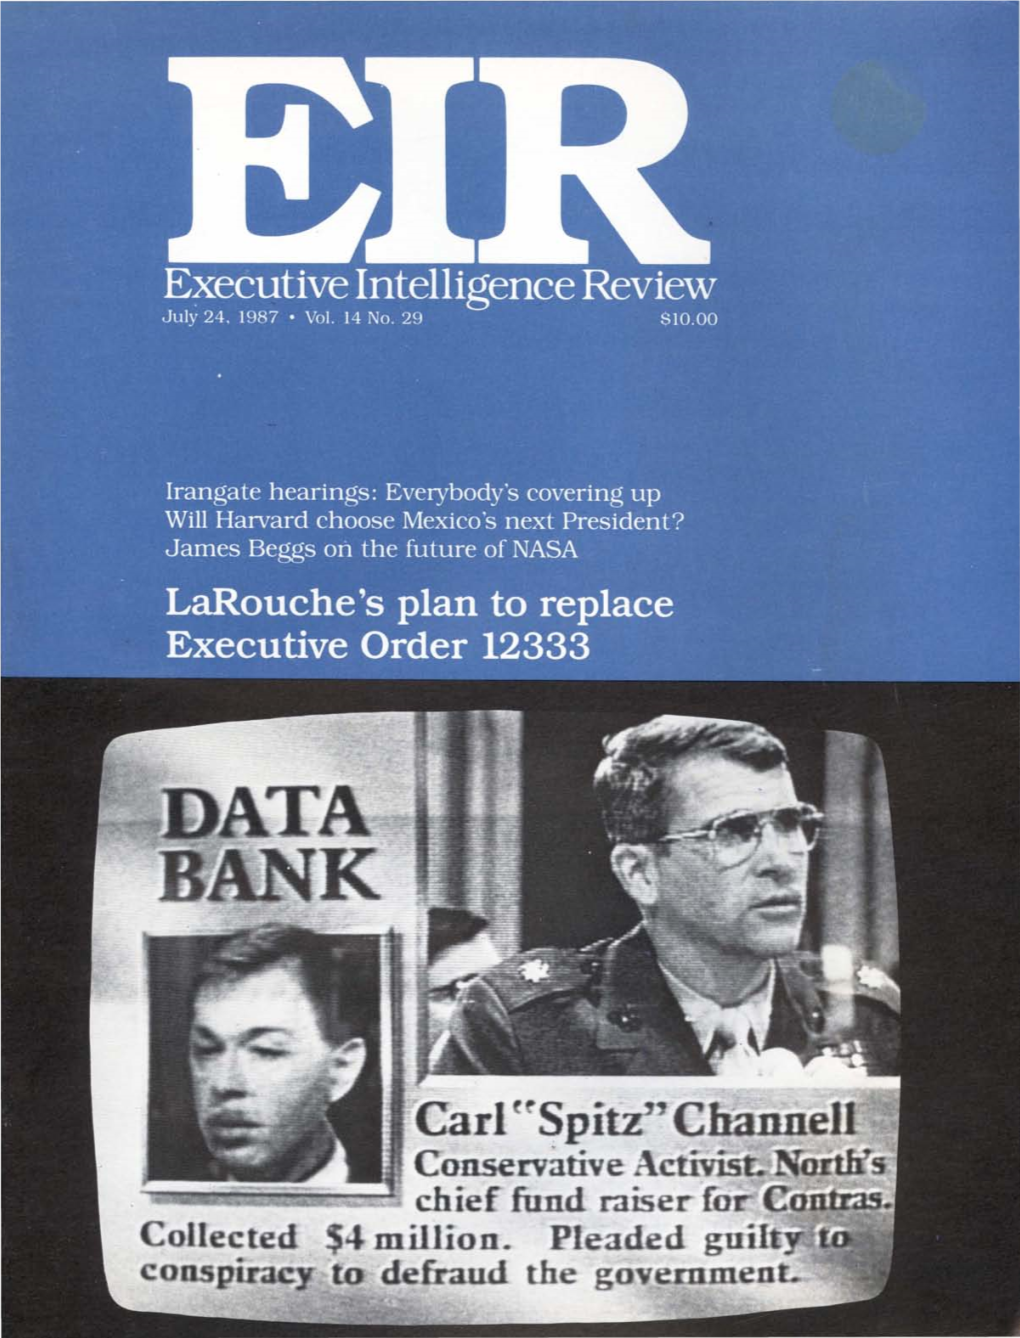 Executive Intelligence Review, Volume 14, Number 29, July 24, 1987